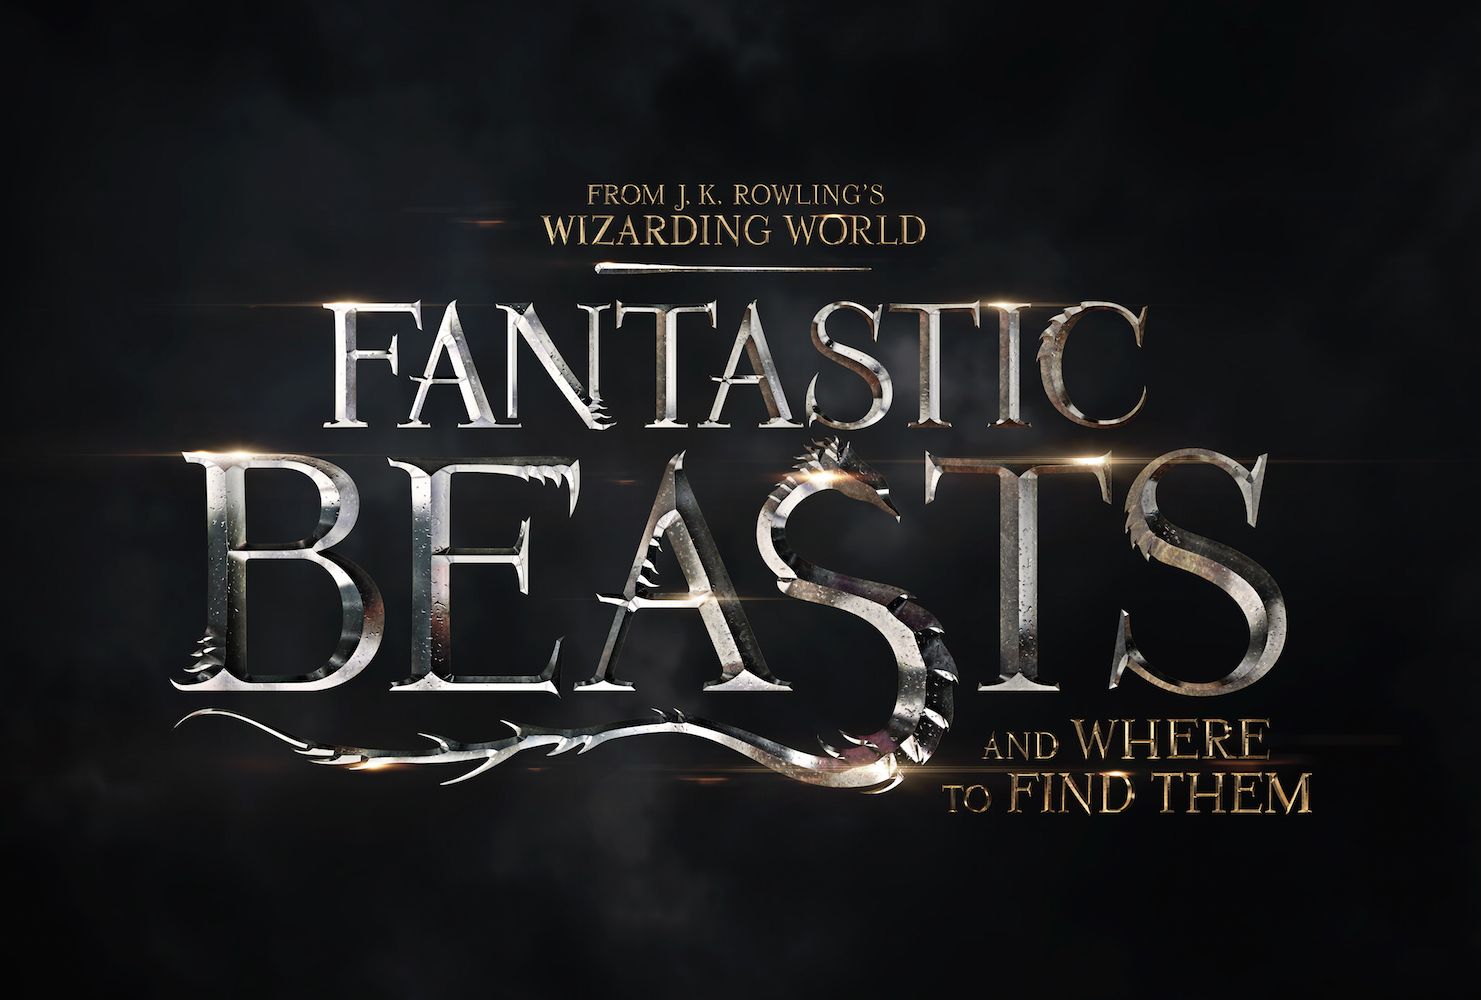 http://cdn.collider.com/wp-content/uploads/2015/11/fantastic-beasts-and-where-to-find-them-large.jpg